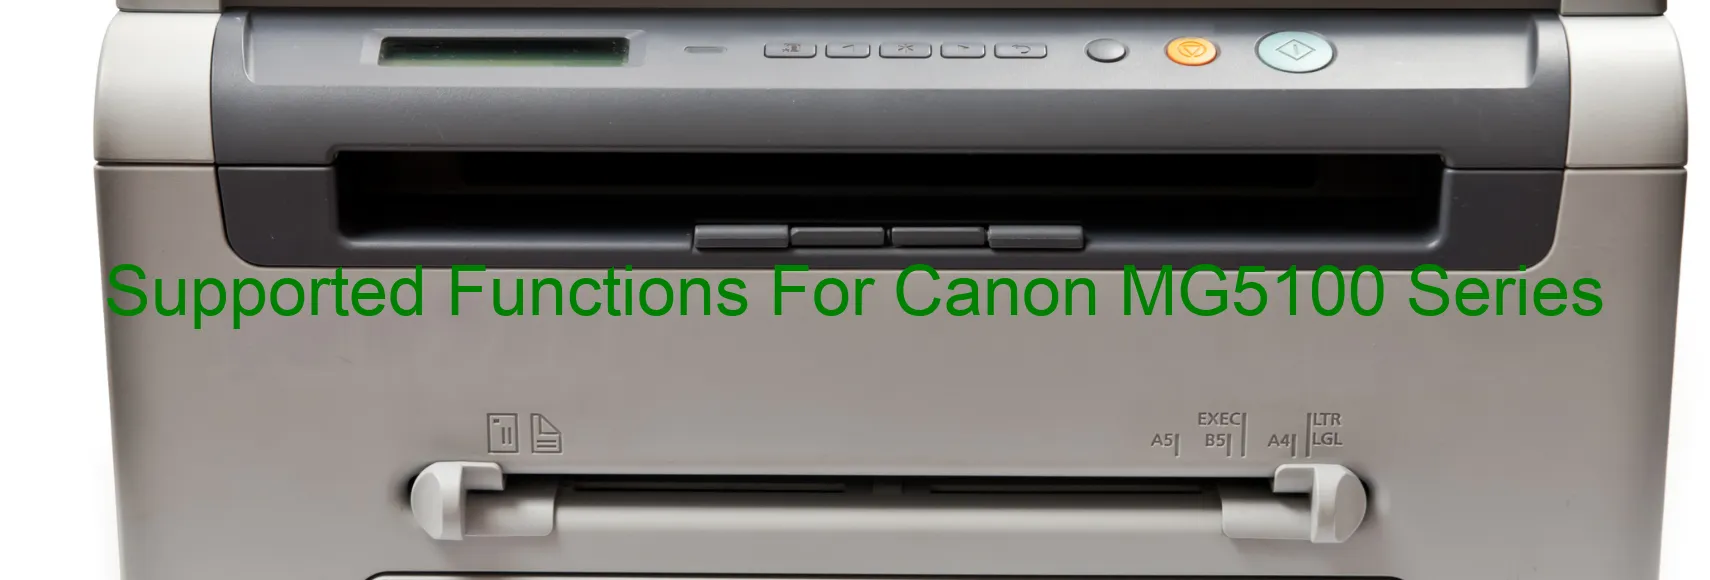 supported-functions-for-canon-mg5100-series.webp